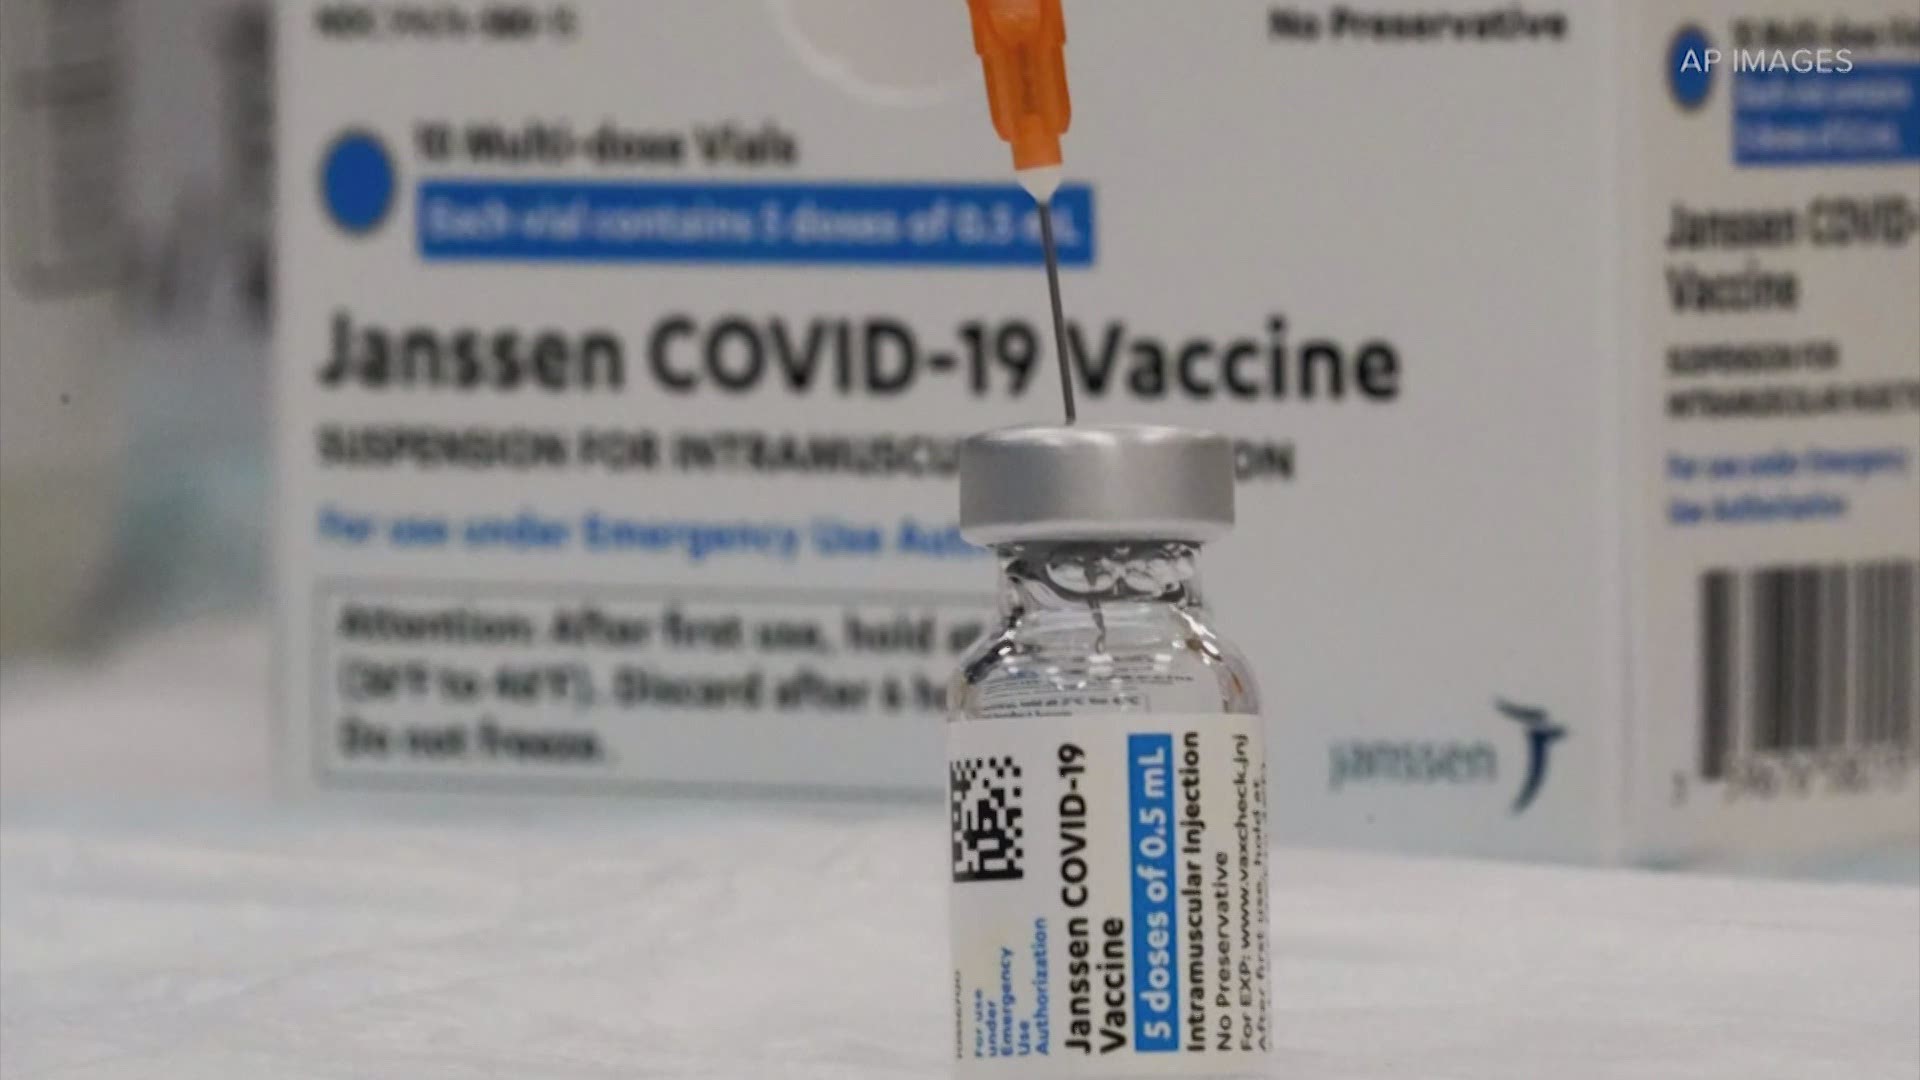 Dr. Larry Corey with Fred Hutch thinks the pause in the use of the Johnson & Johnson vaccine could last “a few weeks.”